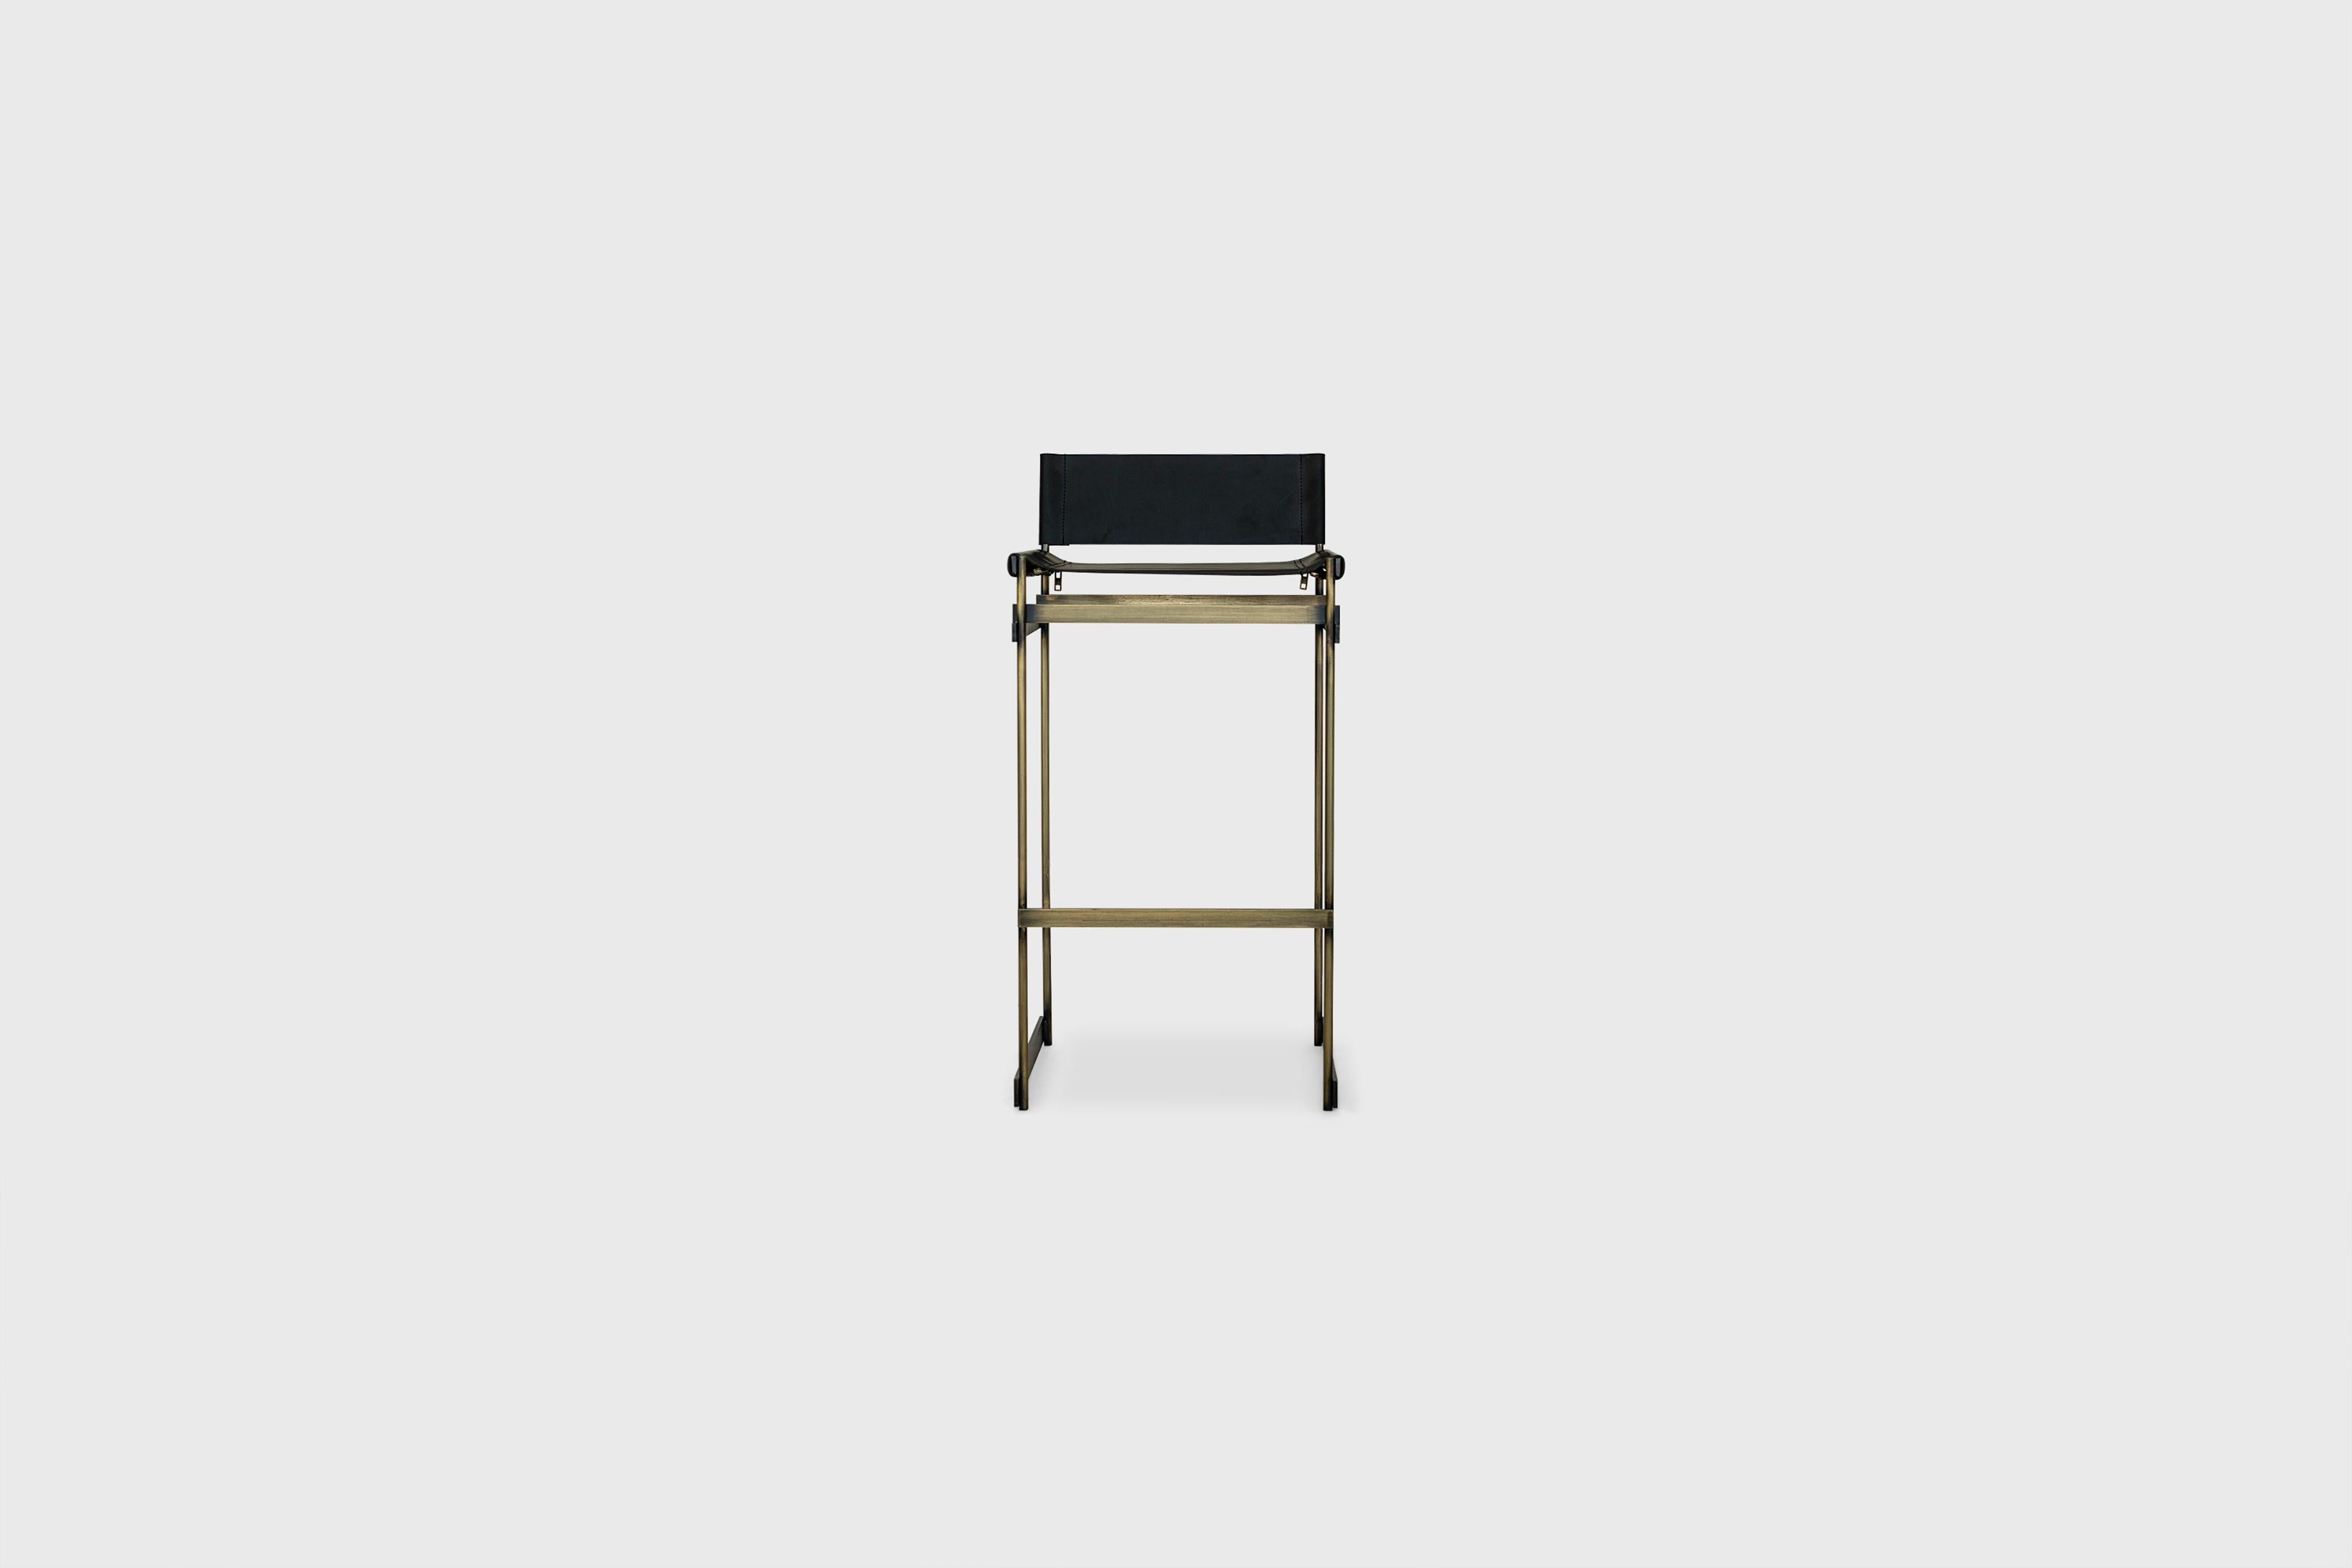 The Redo bar stool in National Leather Seat, Aged Brass Finished Steel Frame
and Brass Zips

Designer: Alexander Diaz Anderson 

Dimensions 
L 44.3cm/17.4”
W 46.2cm/18.1”
H 90.9cm/35.7”

All our items are customizable to your size, requirements and